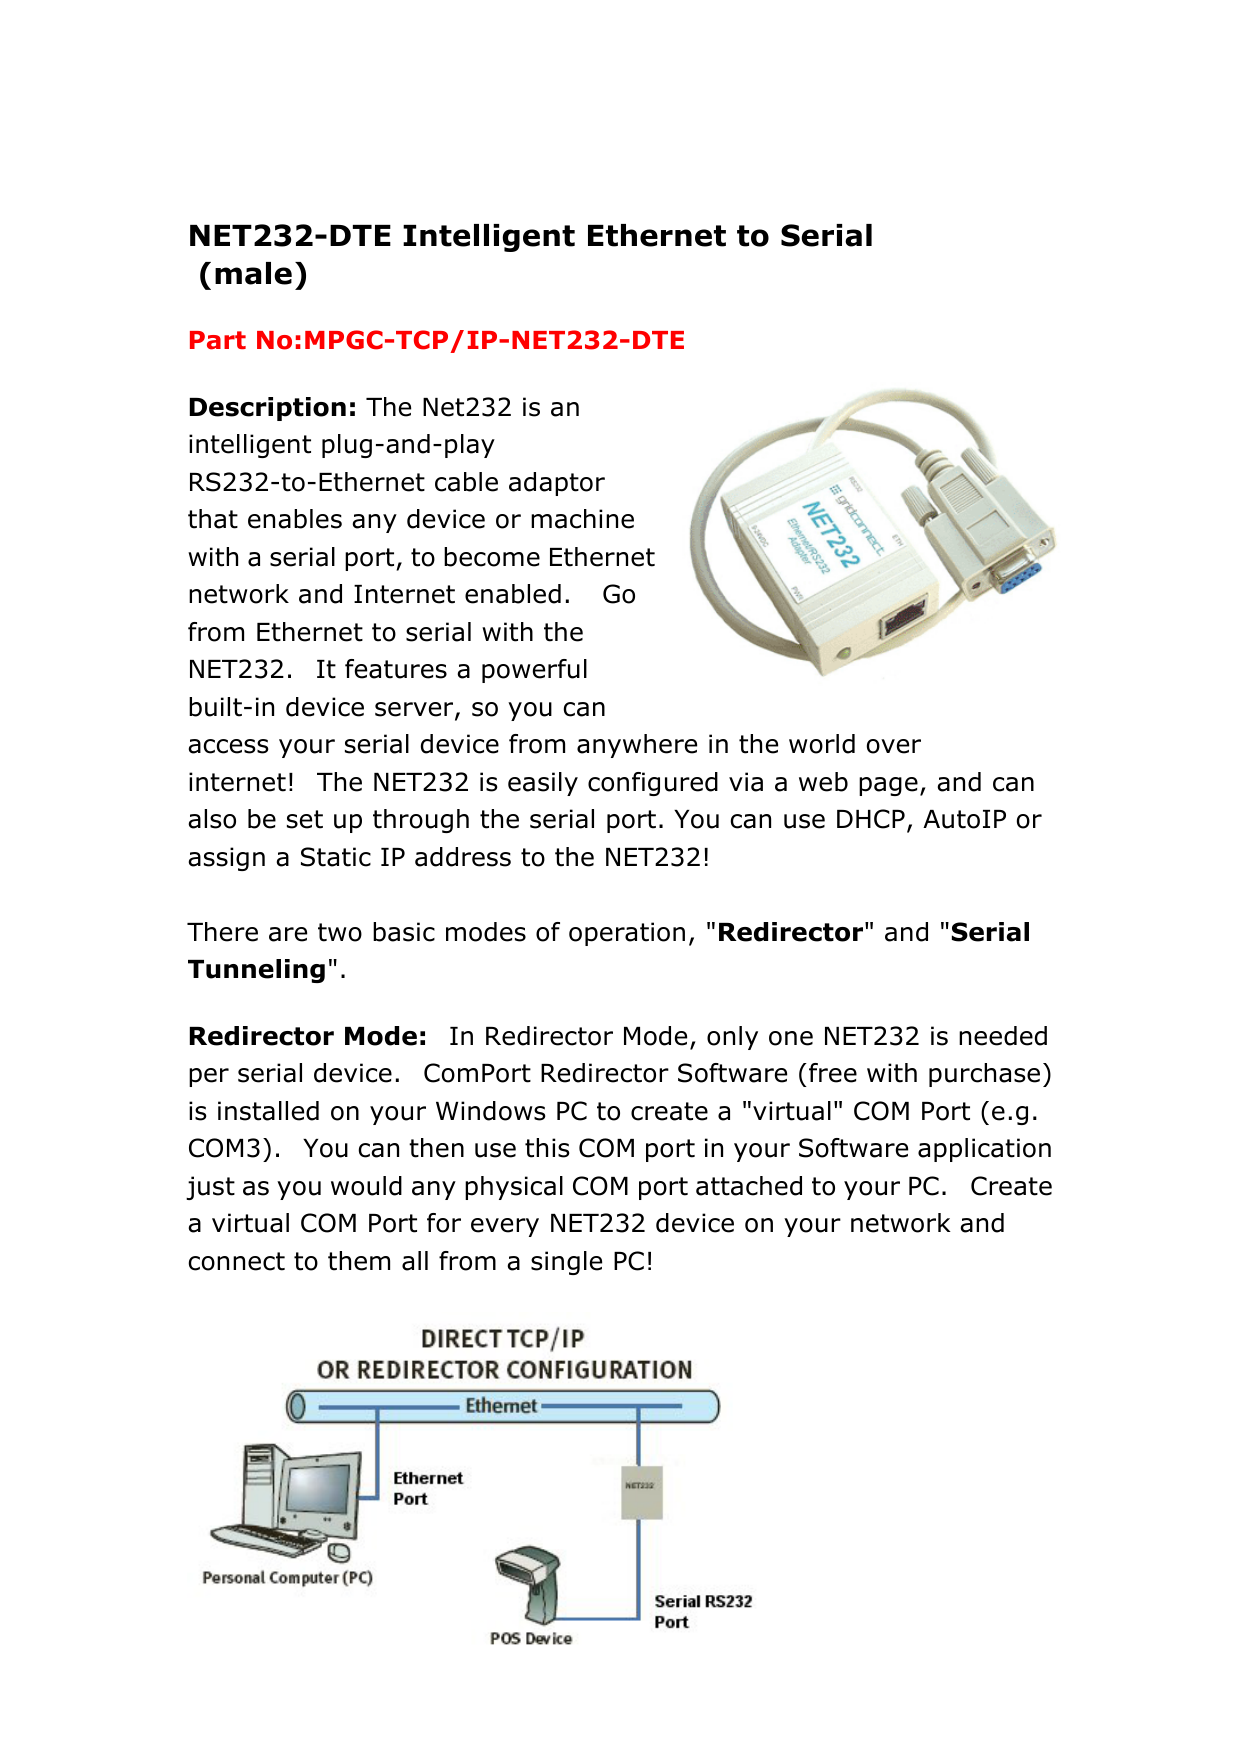 NET232-DTE Intelligent Ethernet to Serial (male) | Manualzz